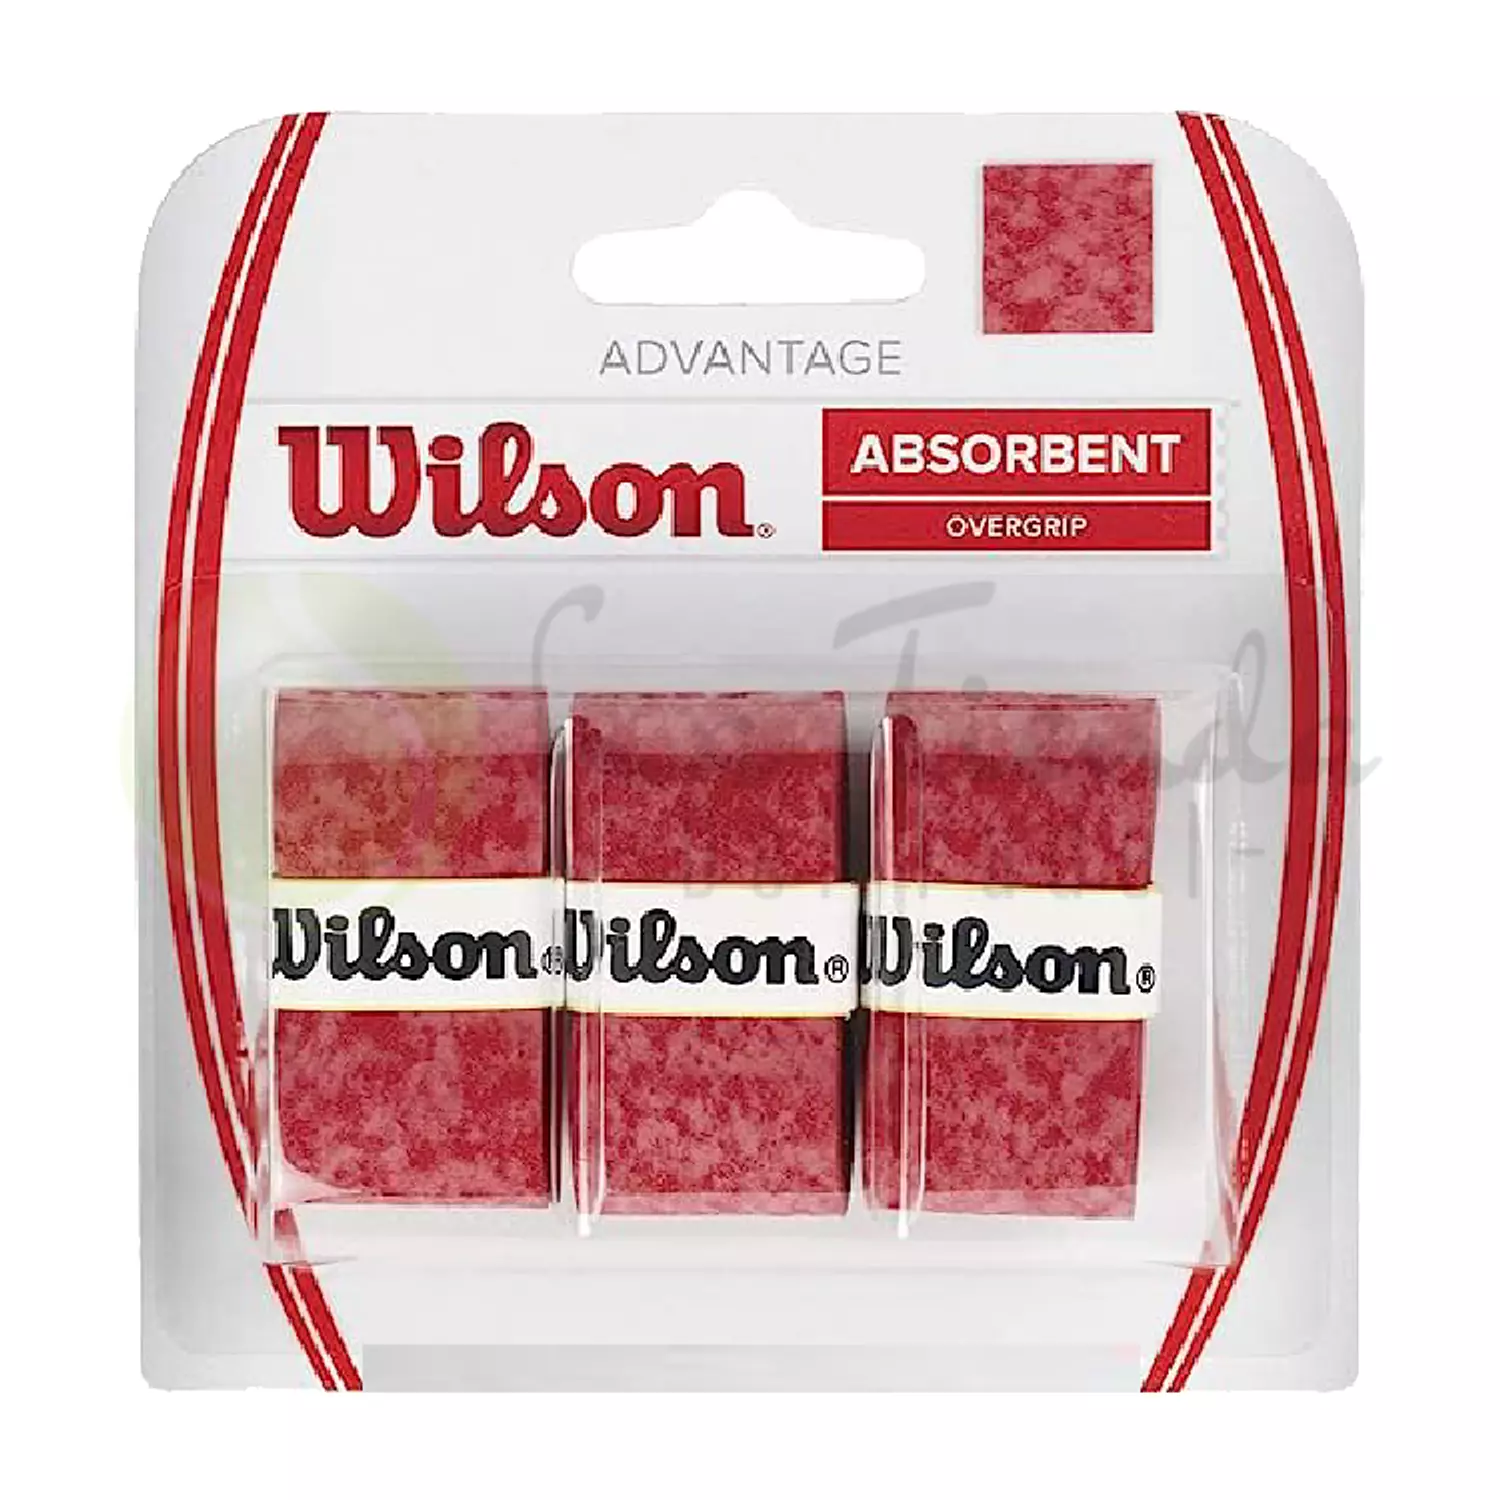 Wilson Advantage Red Overgrip (Pack of 3) hover image